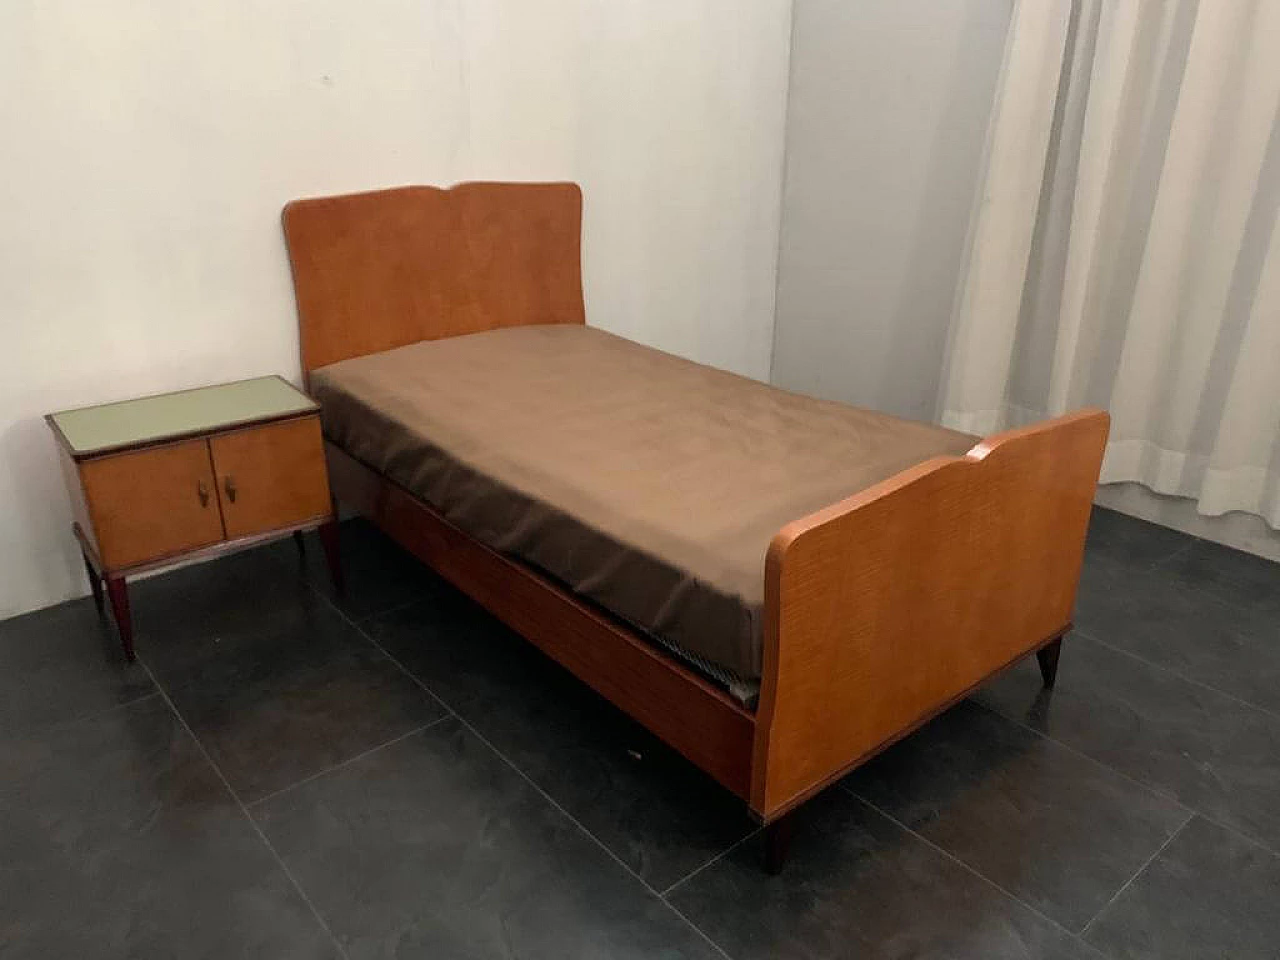 Bed and bedside table set in blond mahogany wood, 1950s 1182208